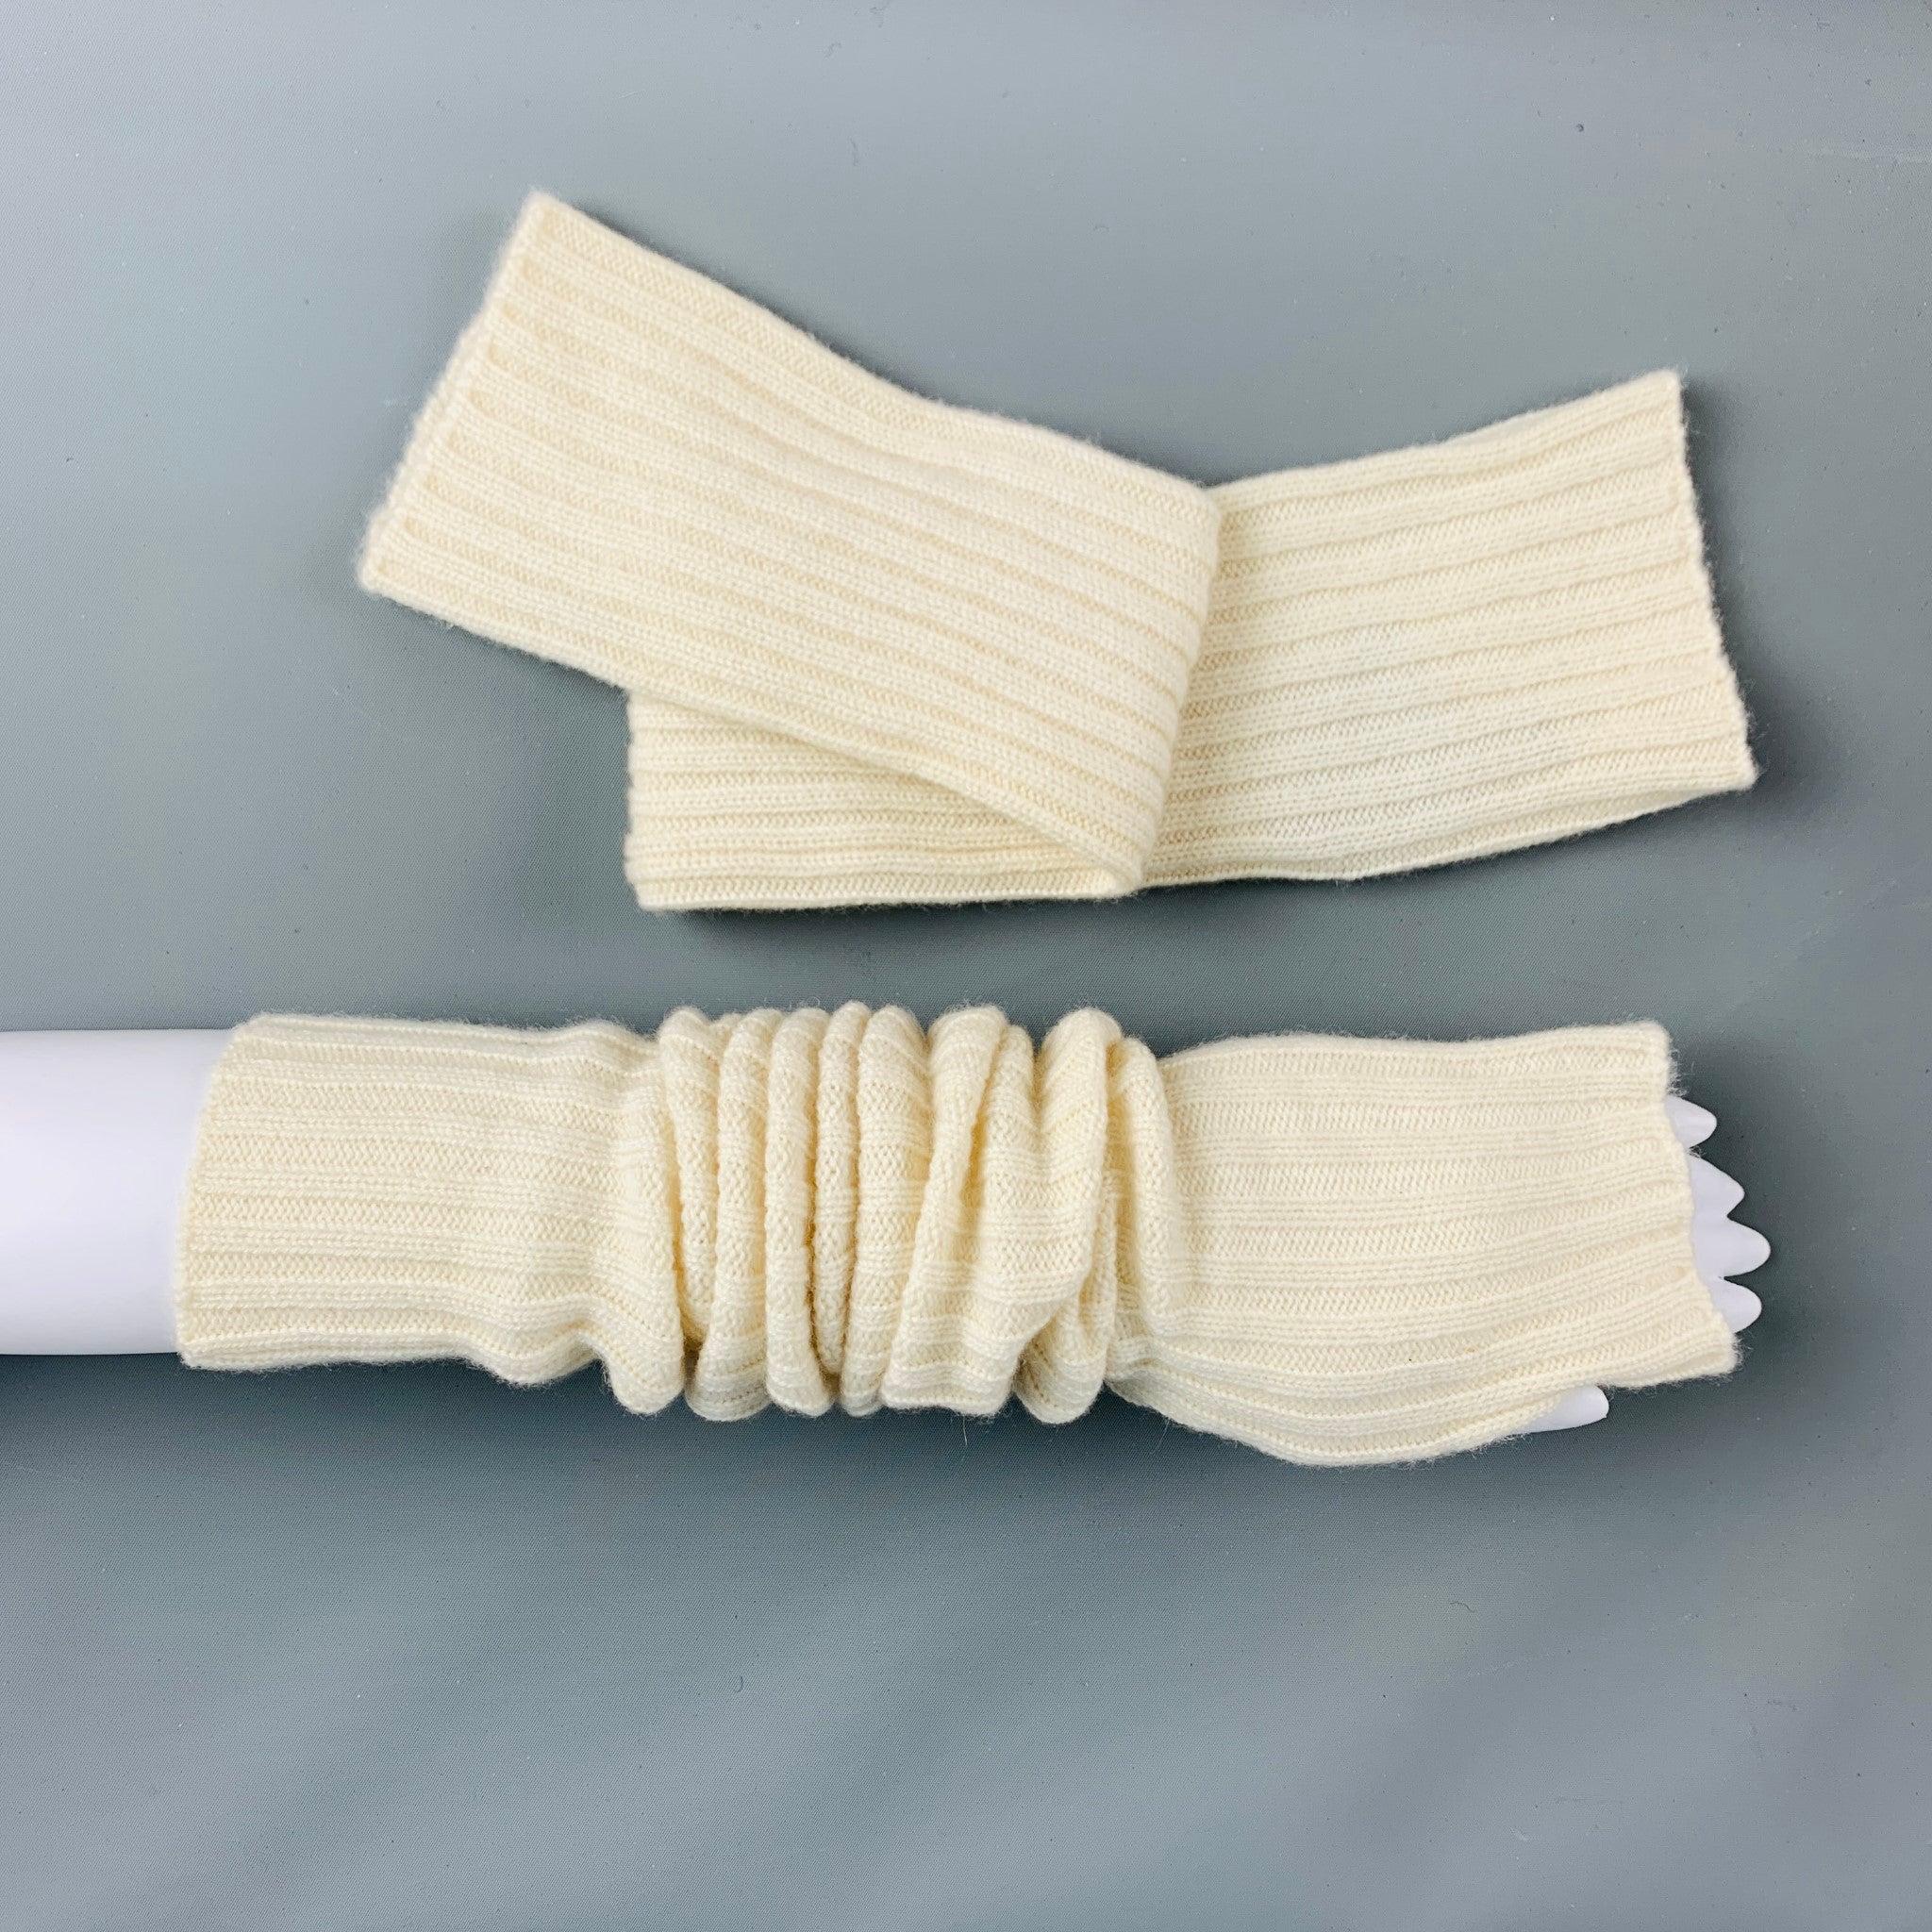 RALPH LAUREN COLLECTION by arm warmers comes in a cream ribbed knit cashmere featuring a fingerless style. Made in Italy. Very Good Pre-Owned Condition. 

Marked:   M/L 

Measurements: 
  Width: 3 inches Length: 22 inches  

  
  
 
Reference No.: